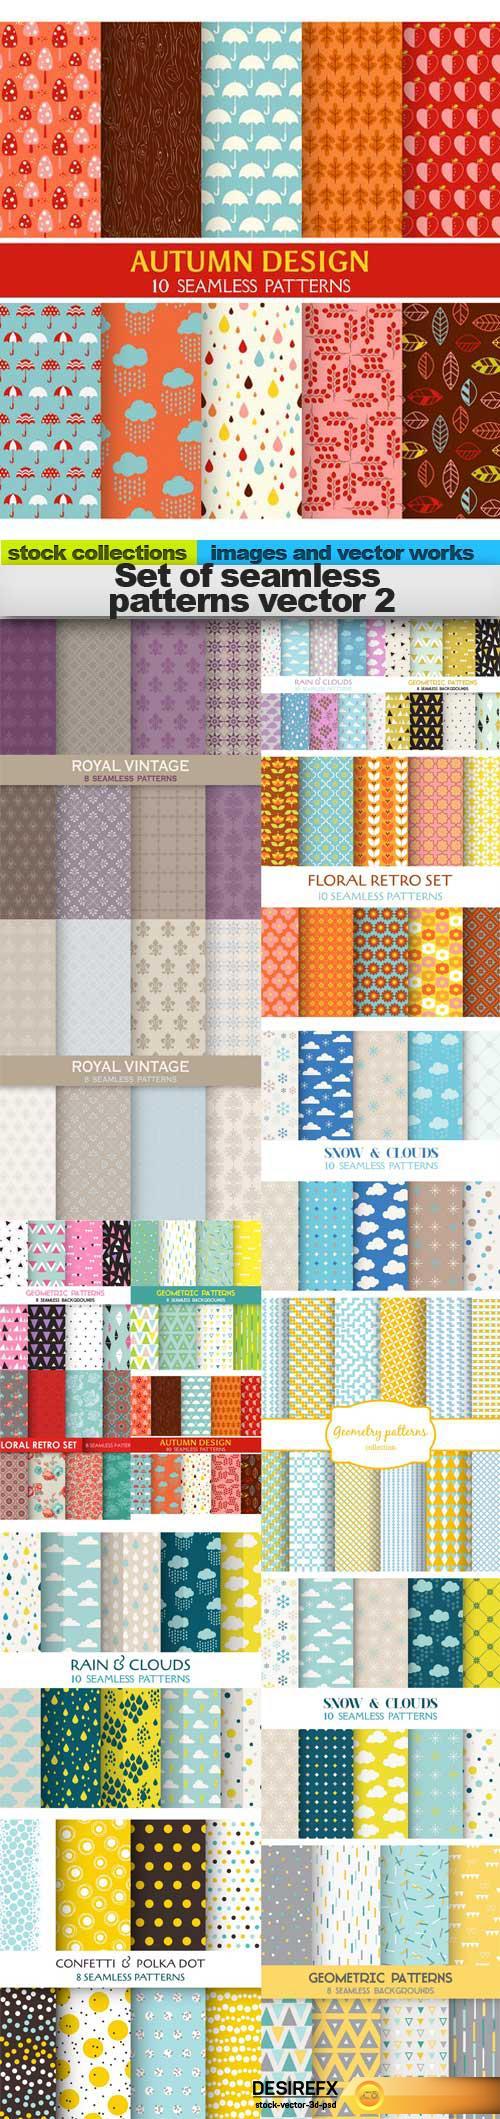 Set of seamless patterns vector 2, 15 x EPS